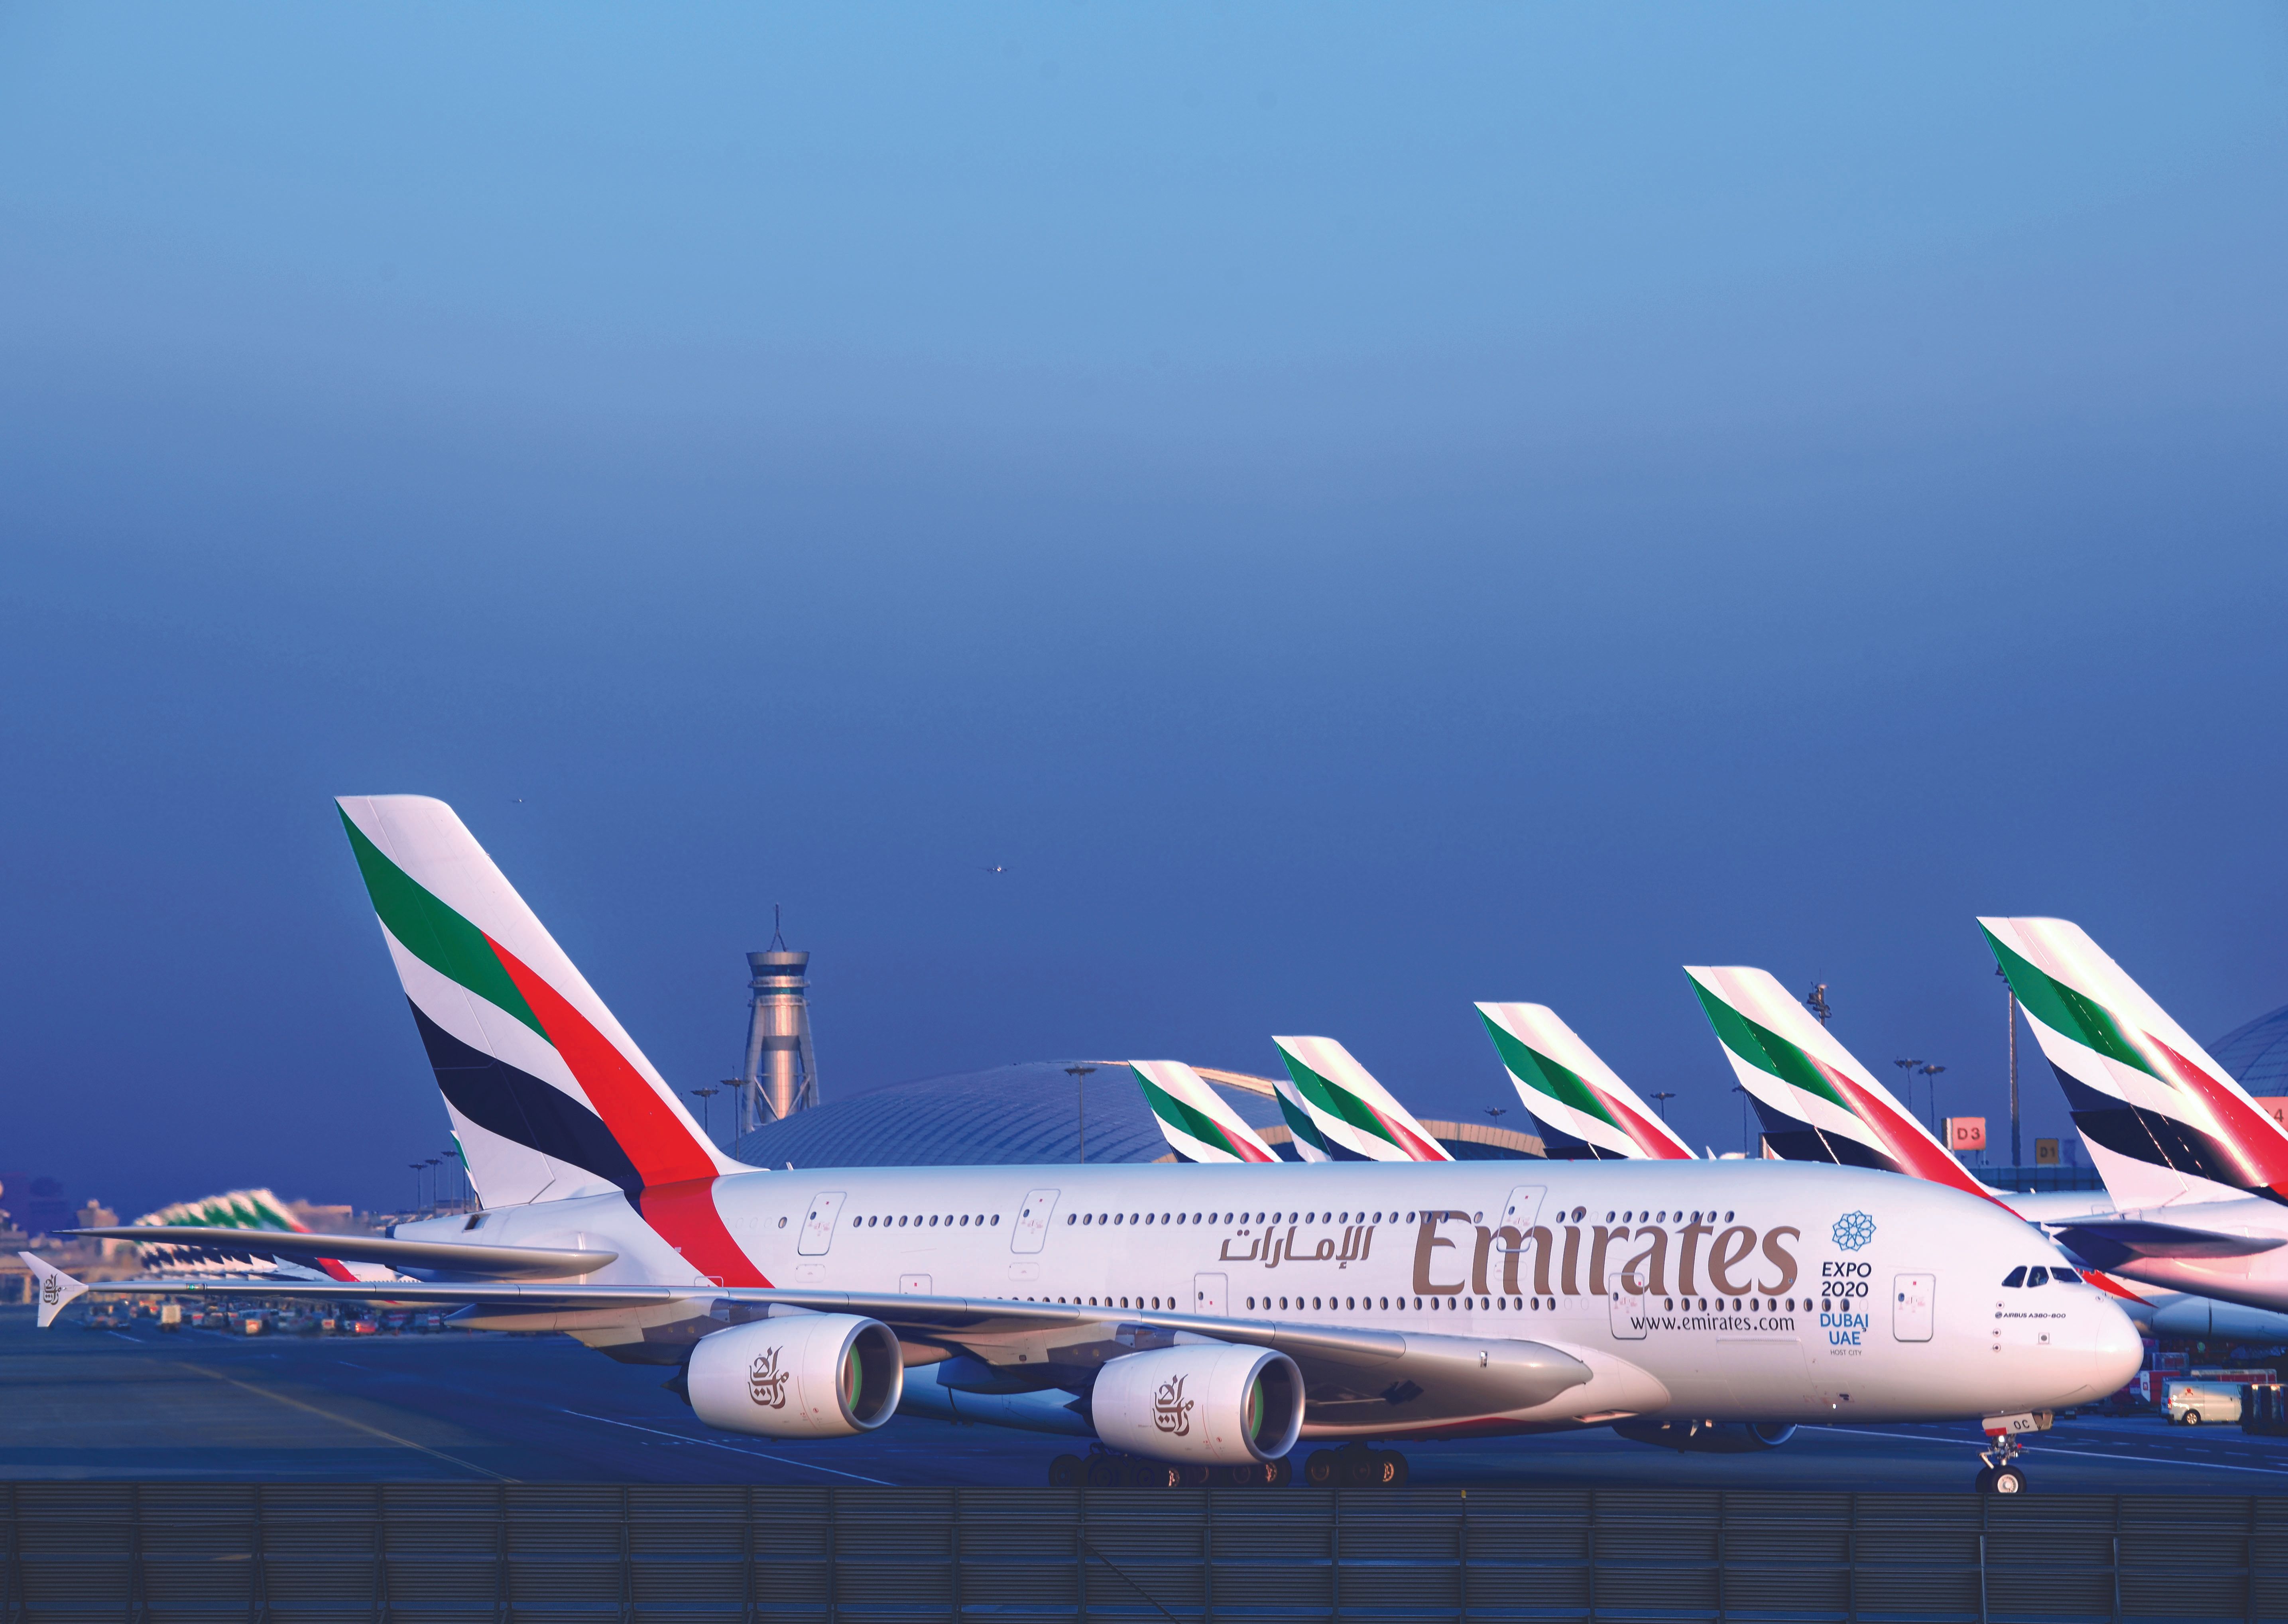 Emirates has a large fleet of Airbus A380 aircraft